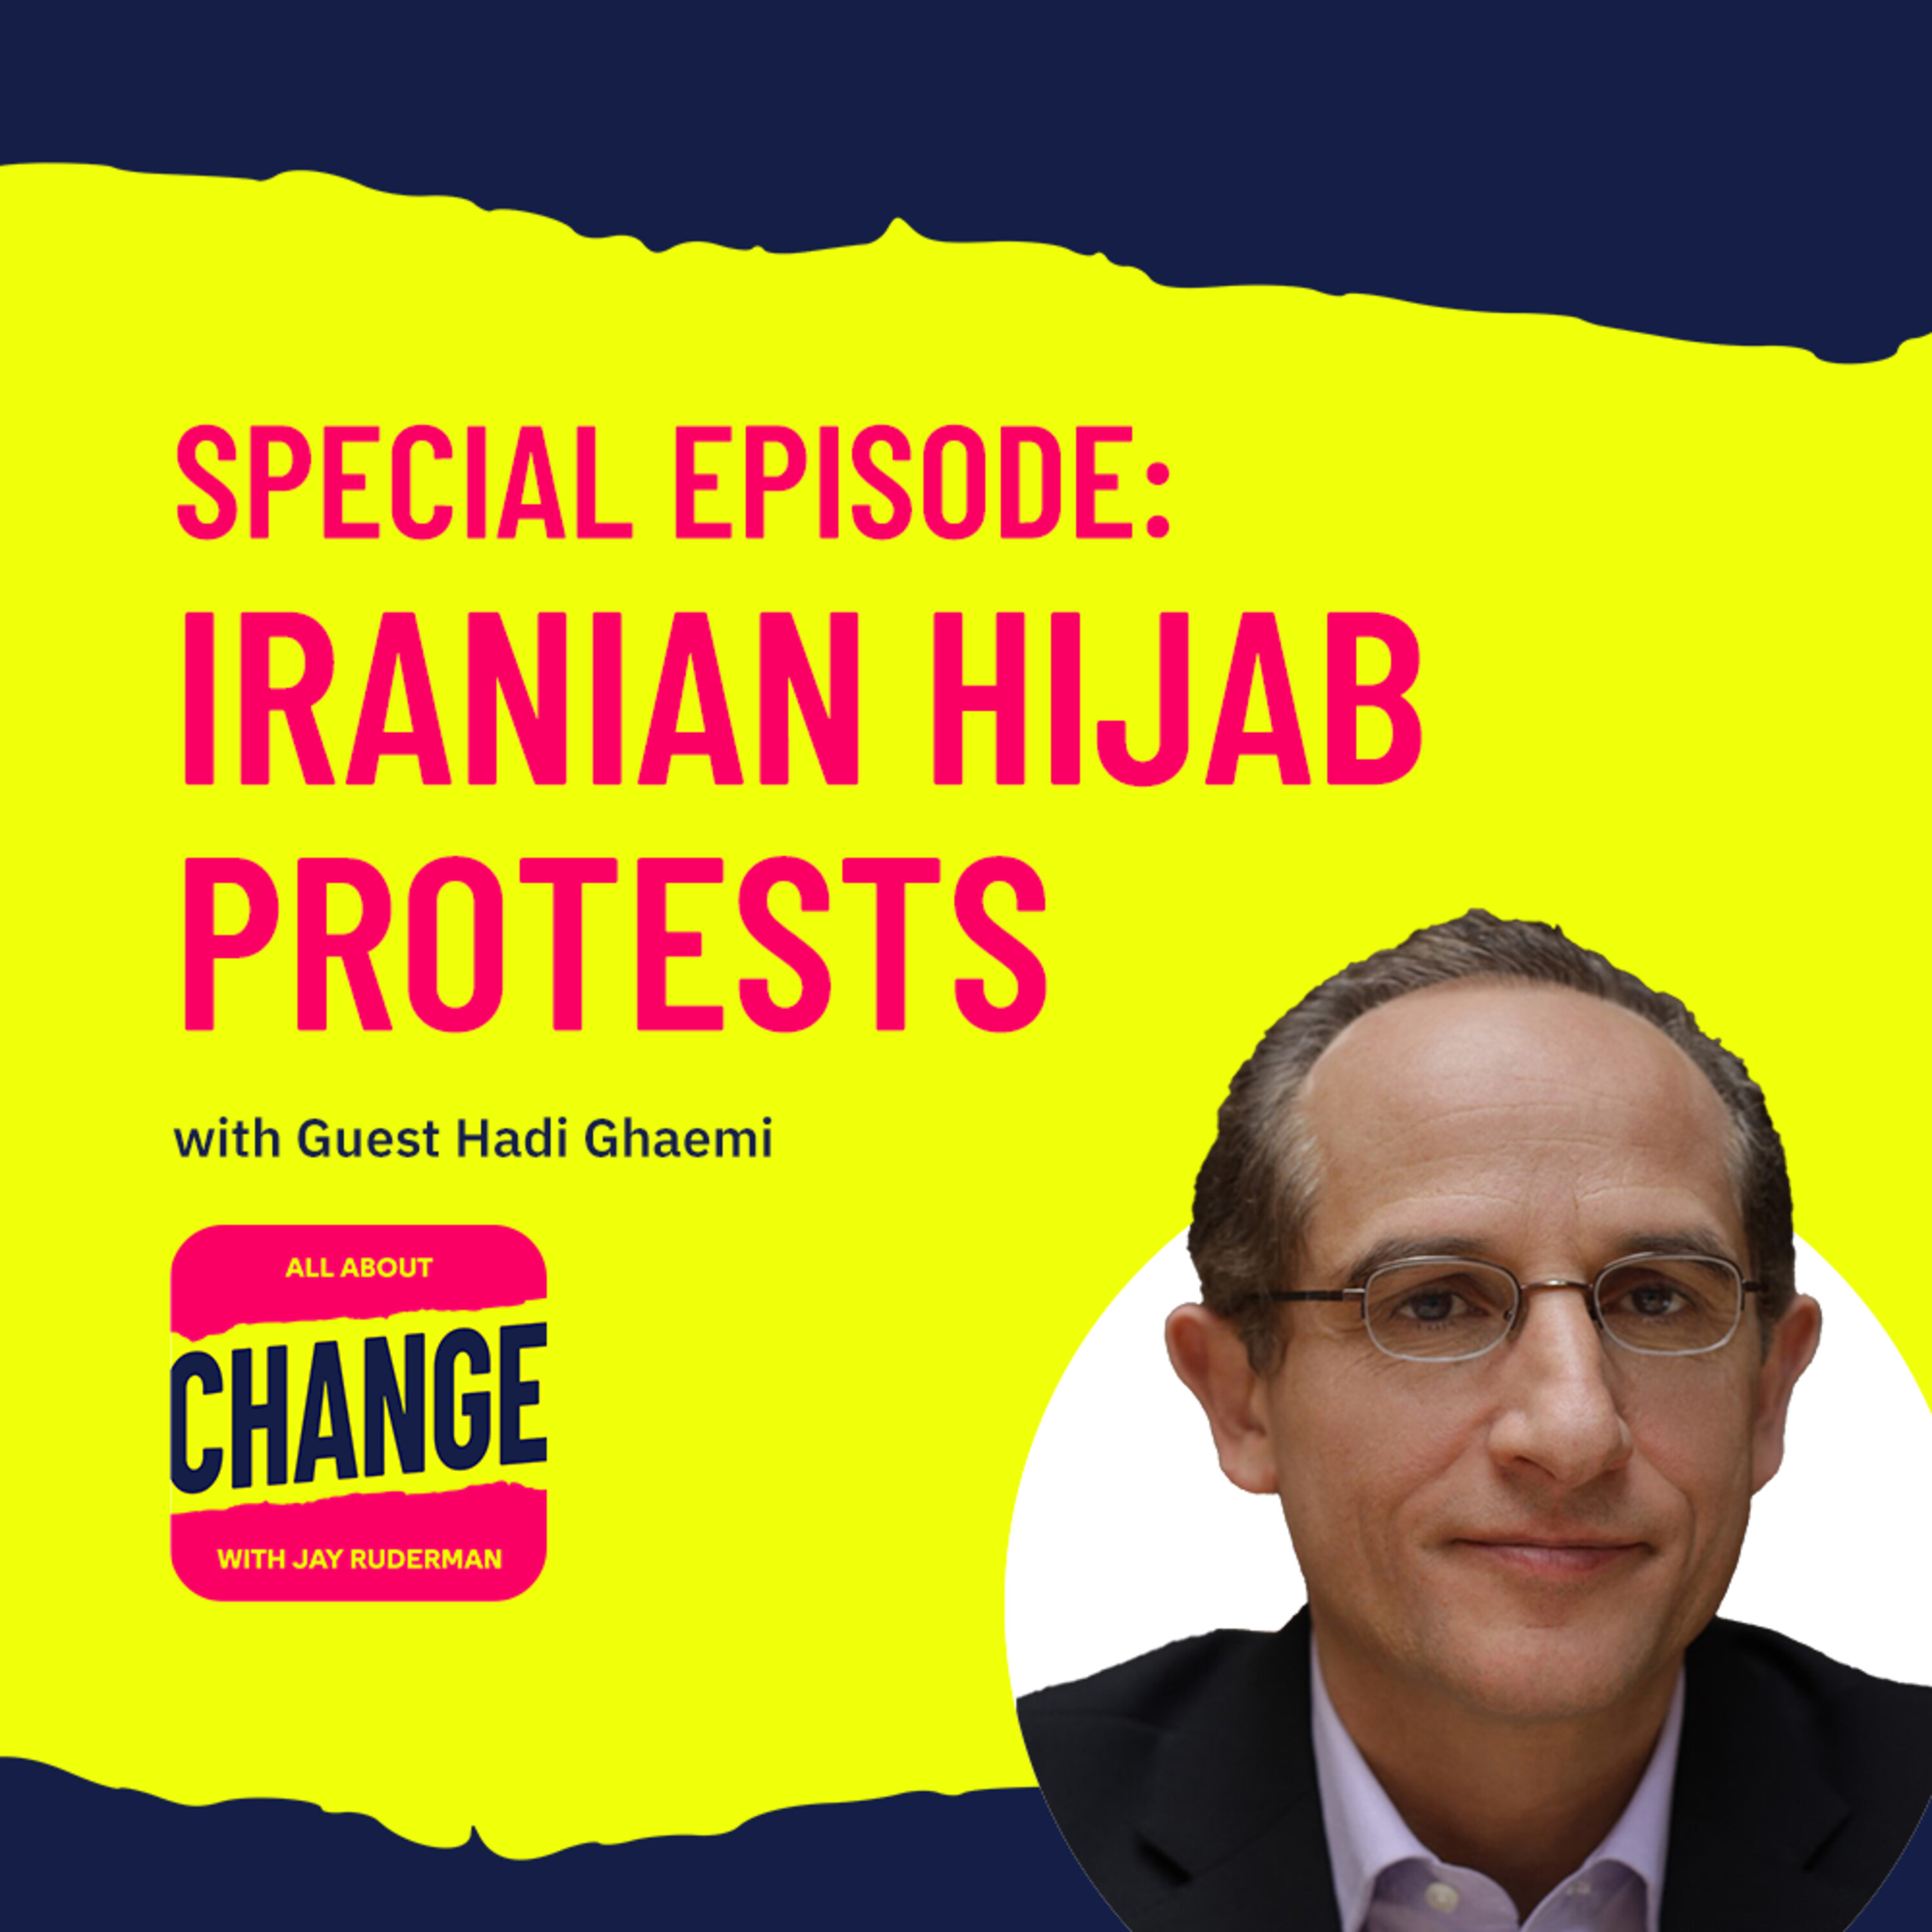 Special Episode: Iranian Hijab Protests with Guest Hadi Ghaemi